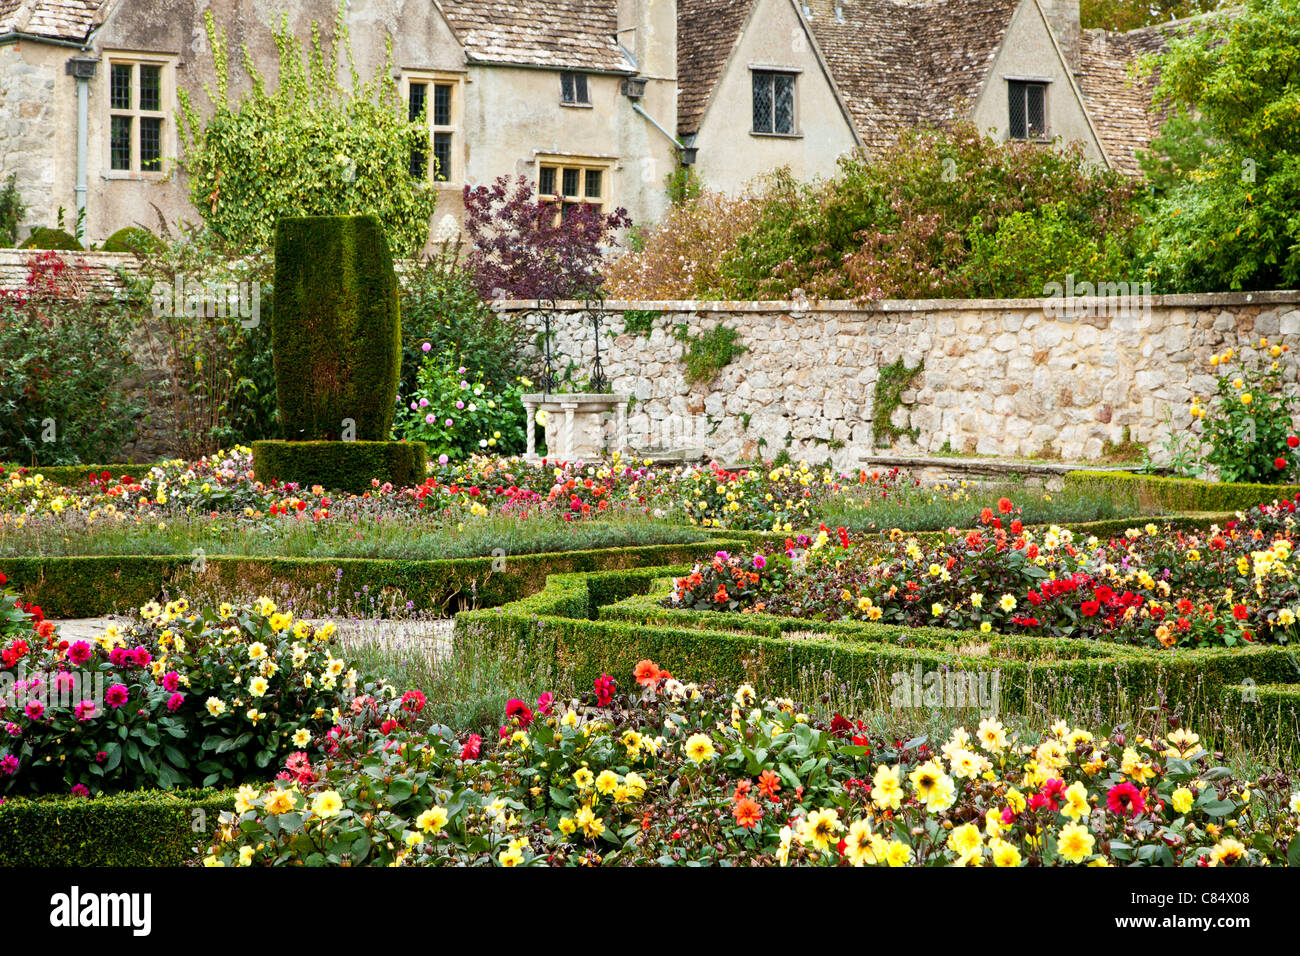 Formal garden of dahlias and low box hedges in front of a typical English country manor. Stock Photo